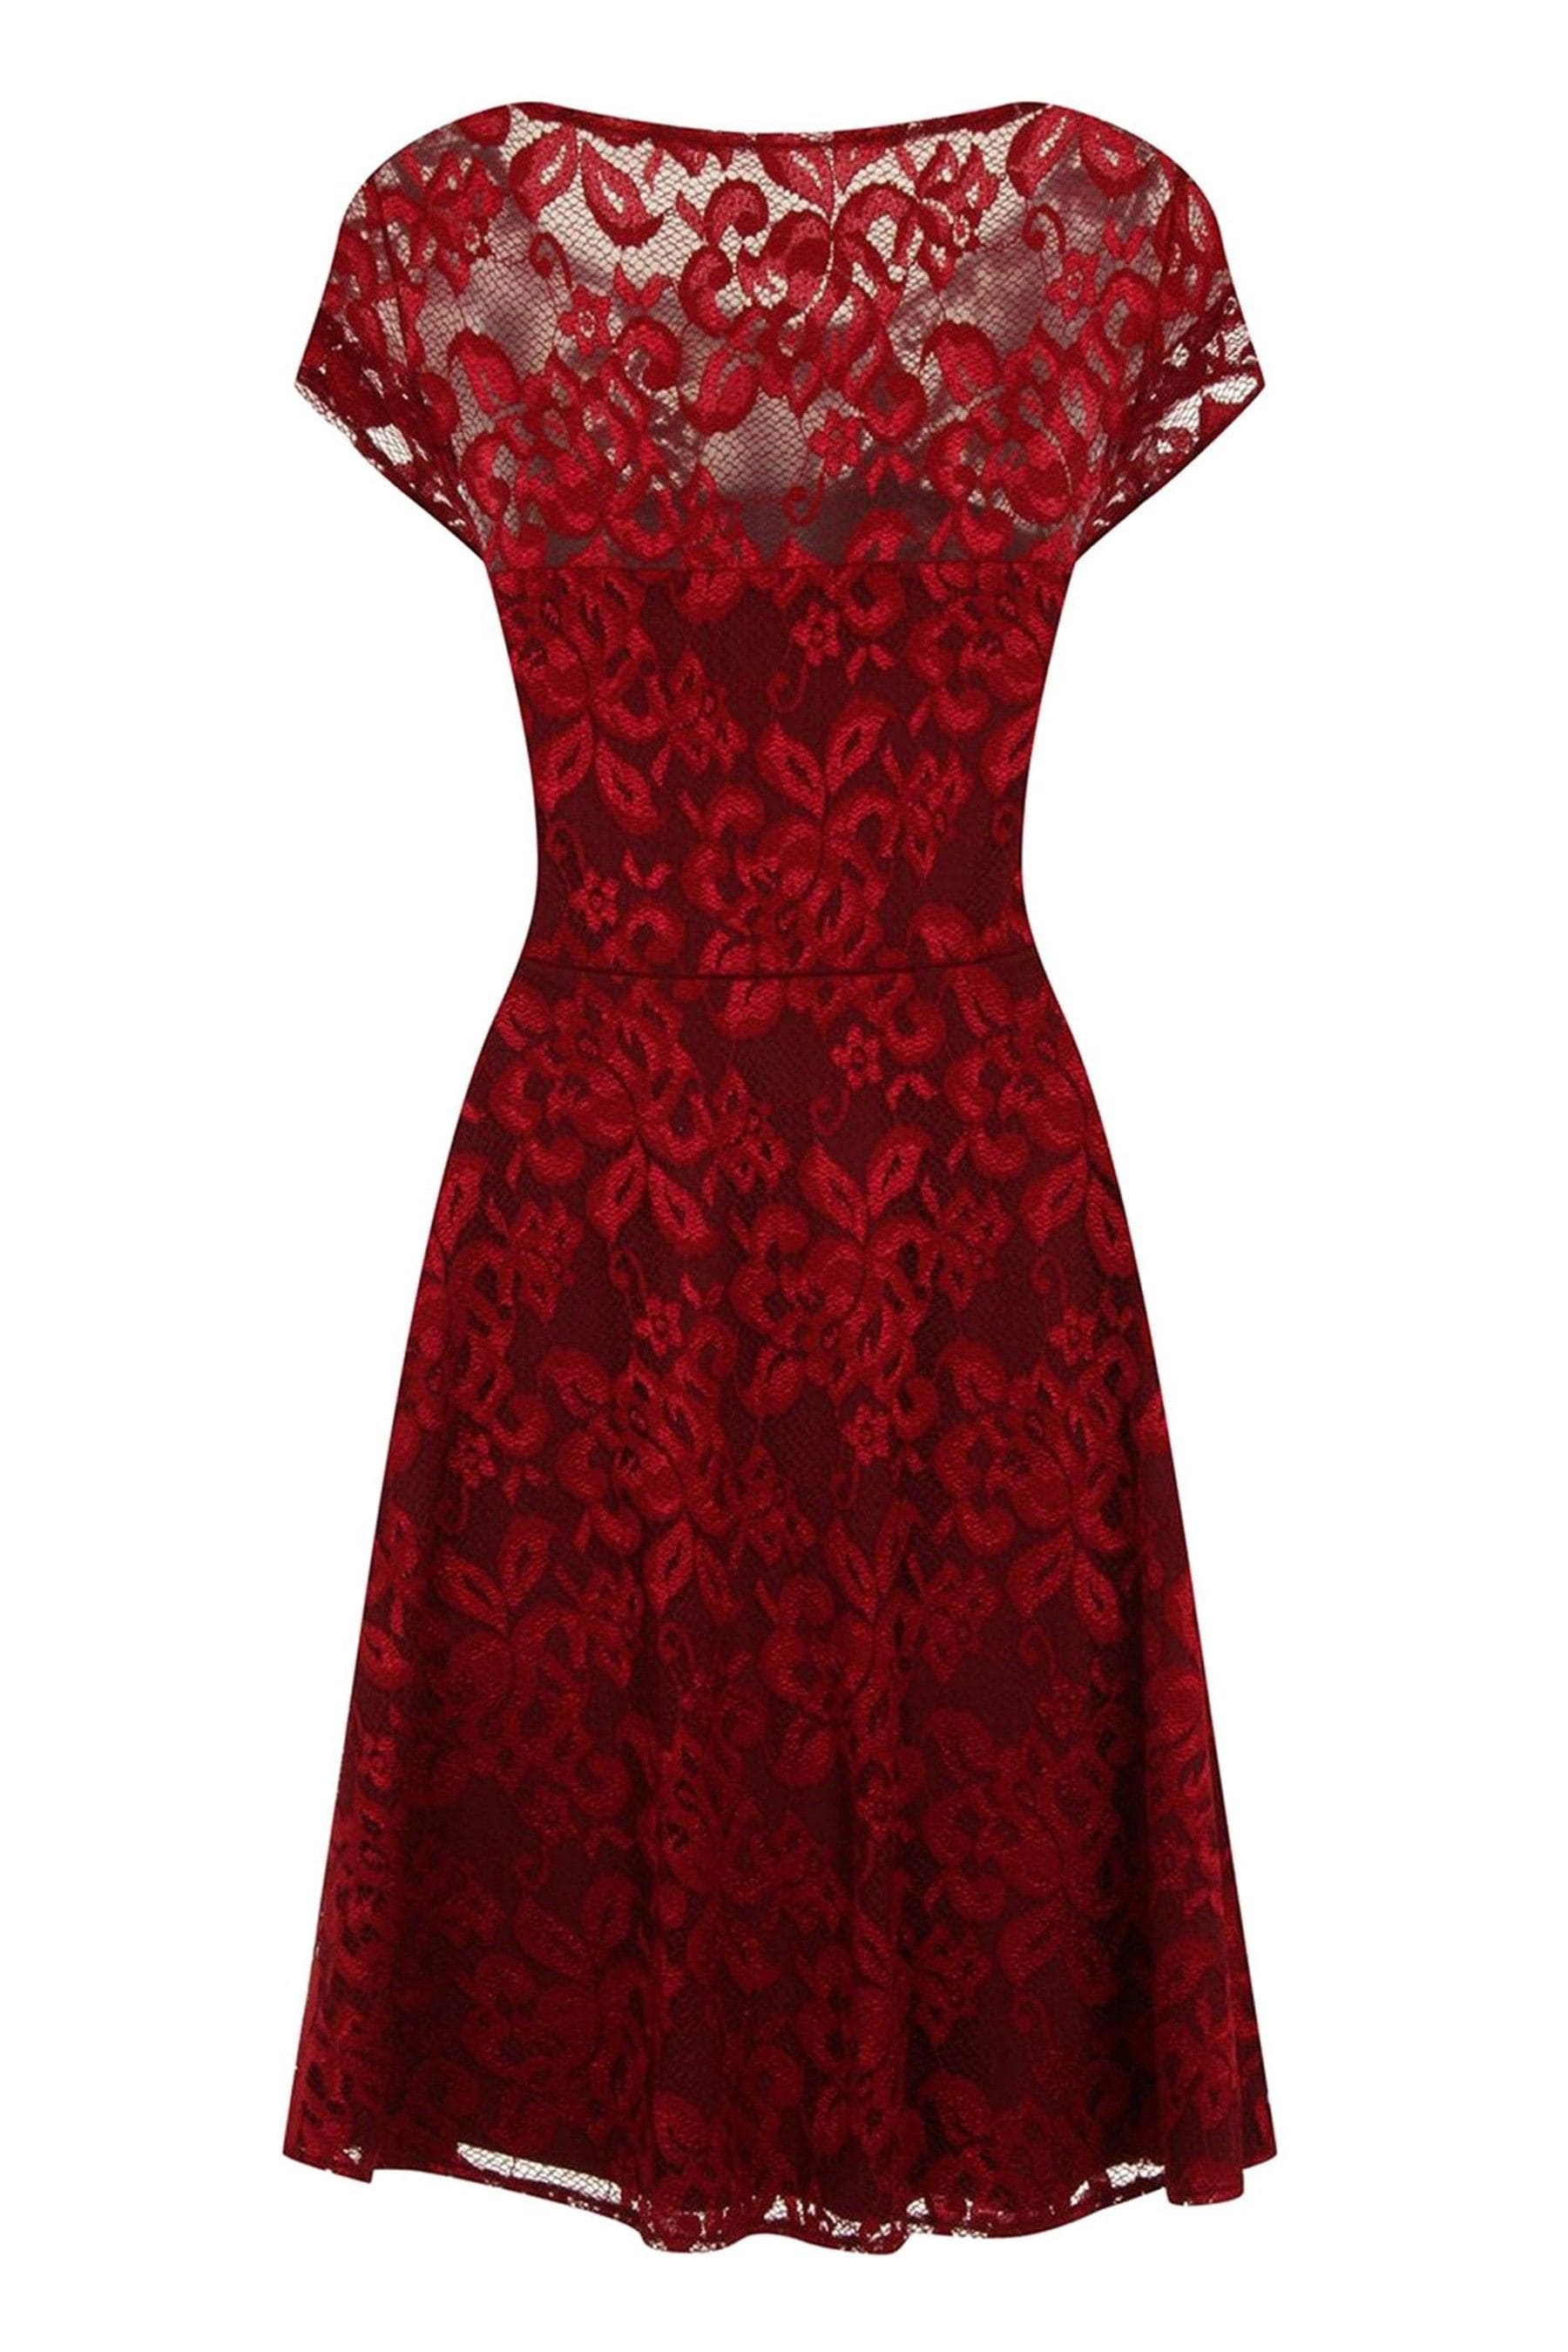 Buy Hotsquash Red Lace Fit And Flare Dress From The Next Uk Online Shop